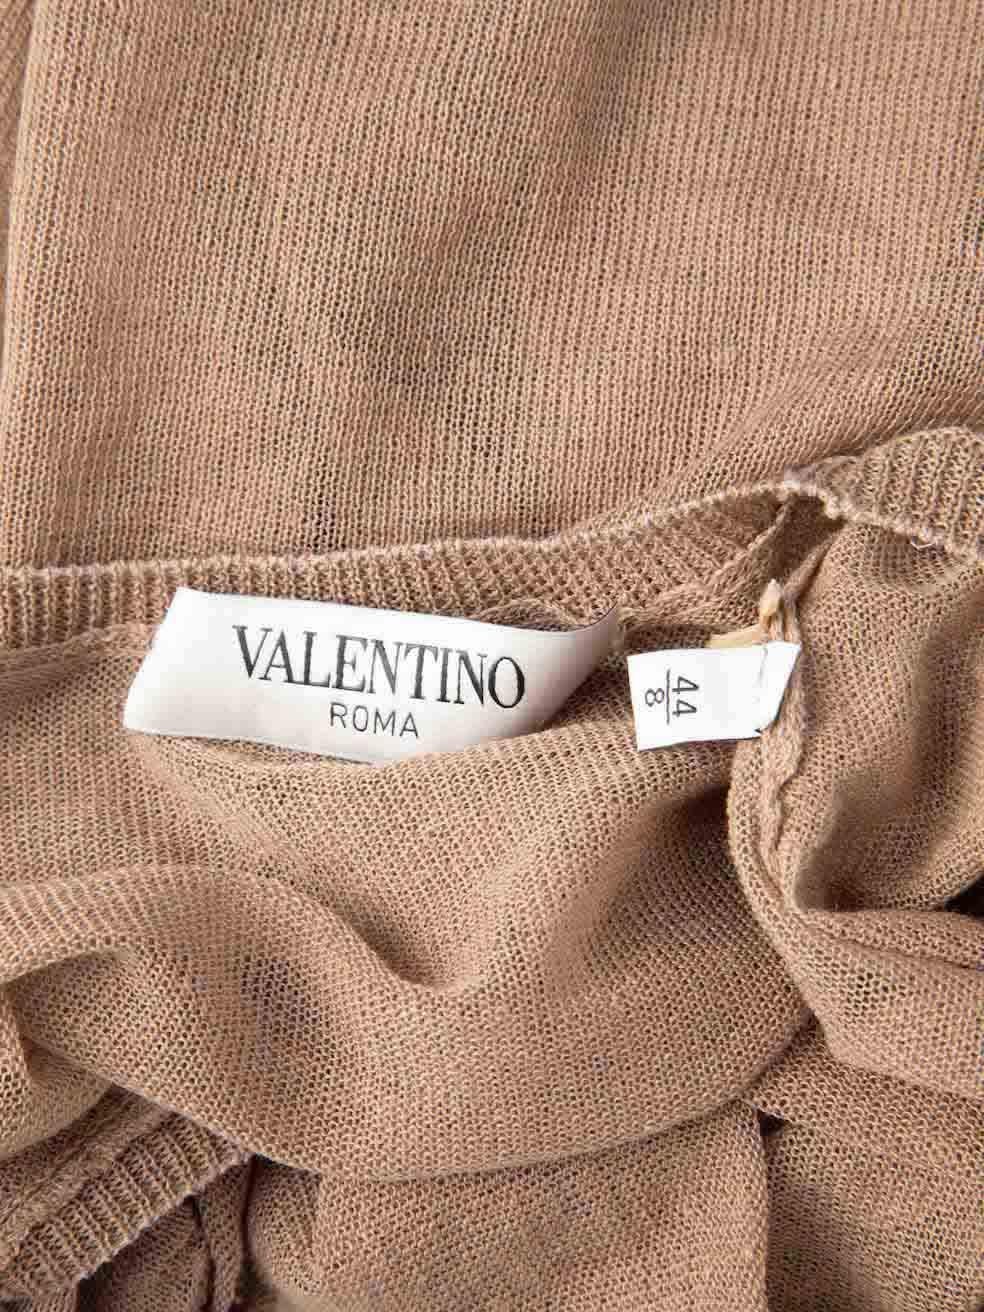 Valentino Brown Ruffle Knit Top Size L For Sale 2